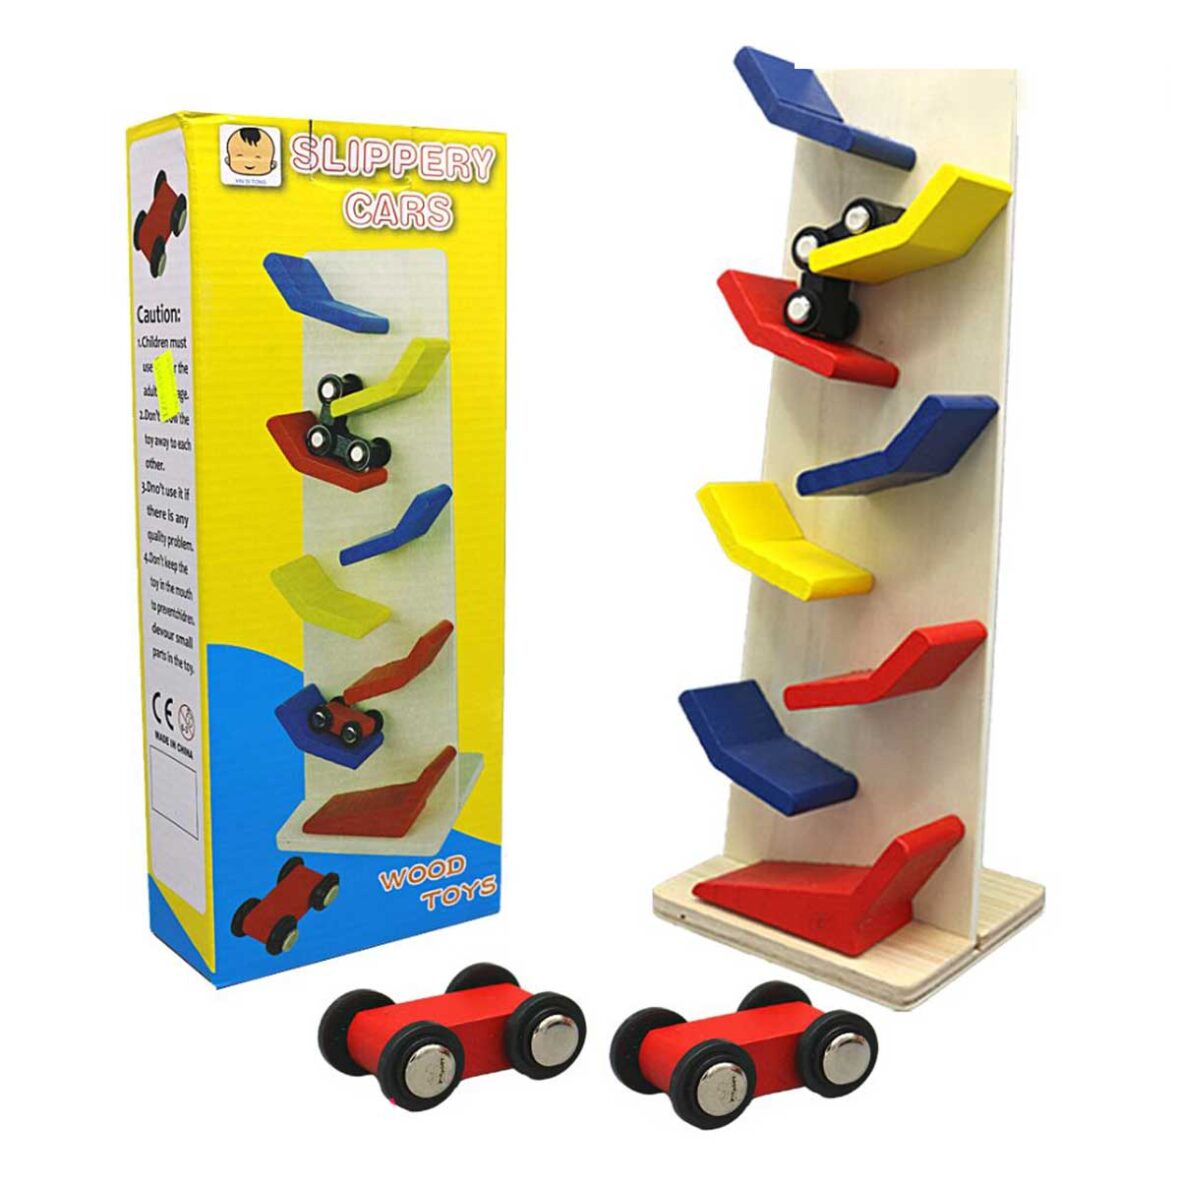 Slippery Cars Toy